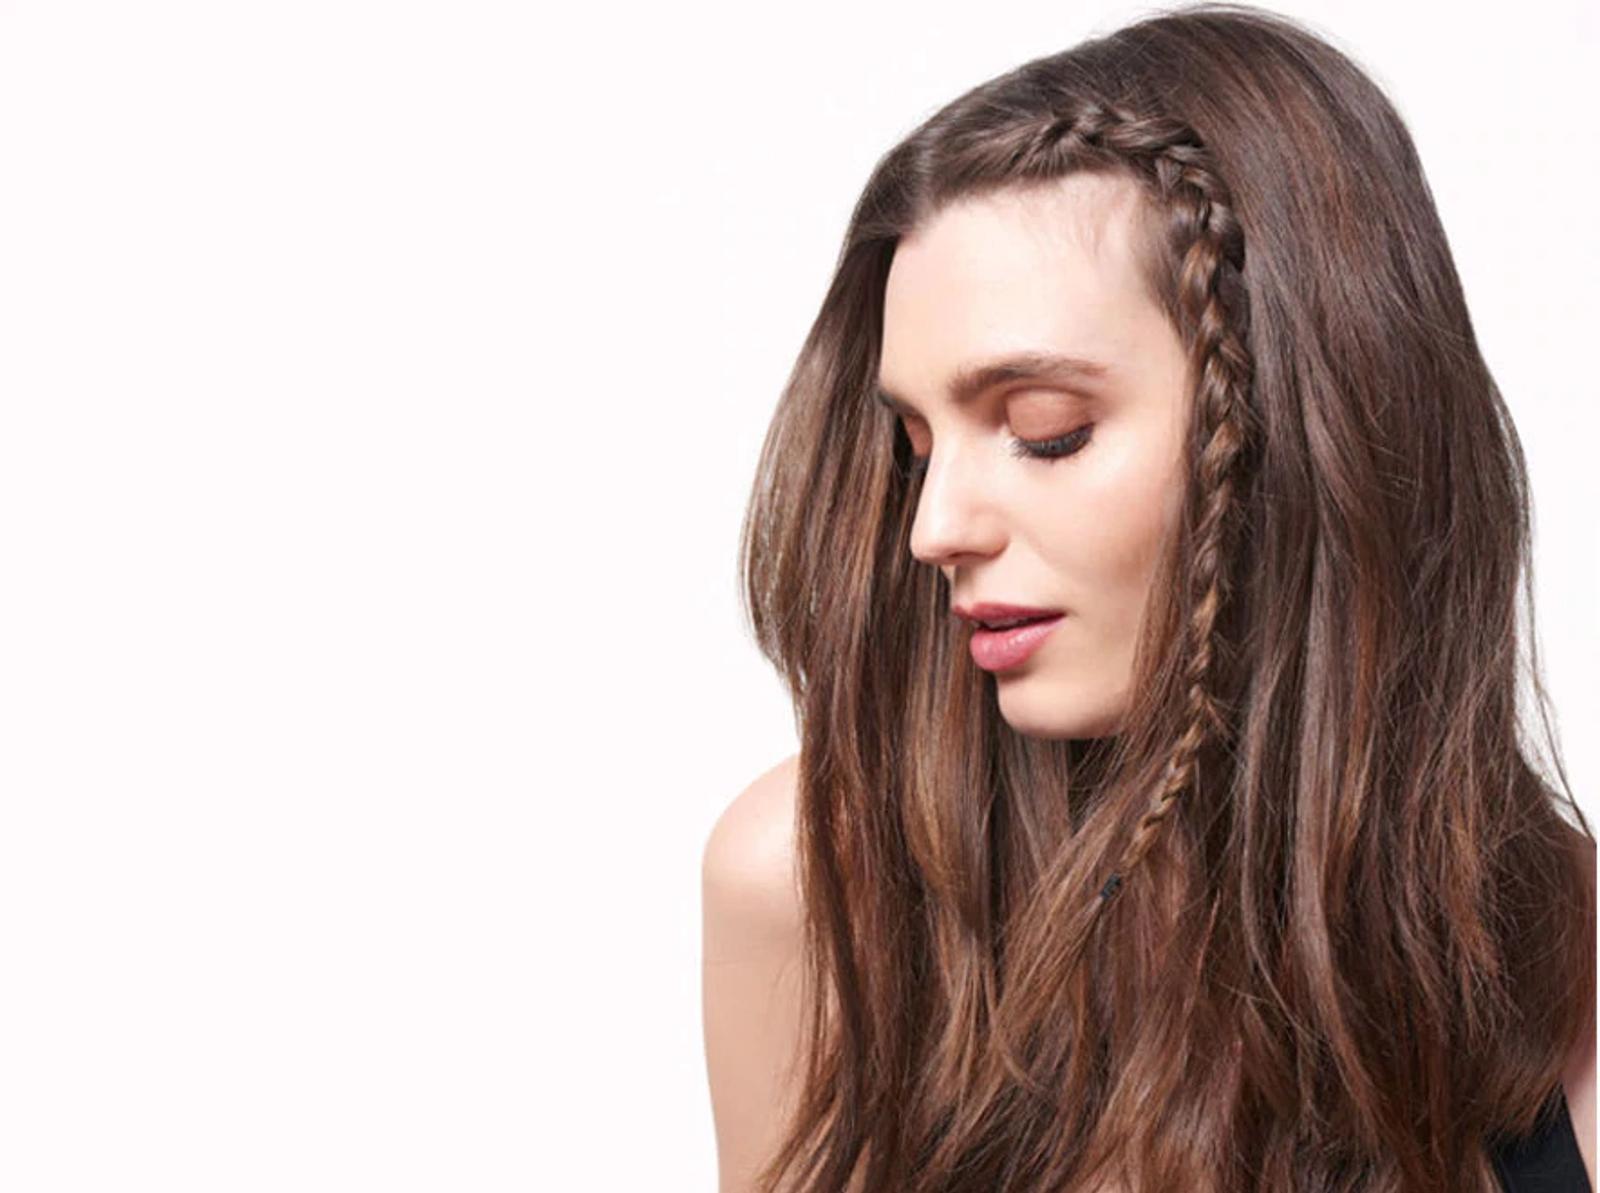 Model with Accent Braid Hairstyle